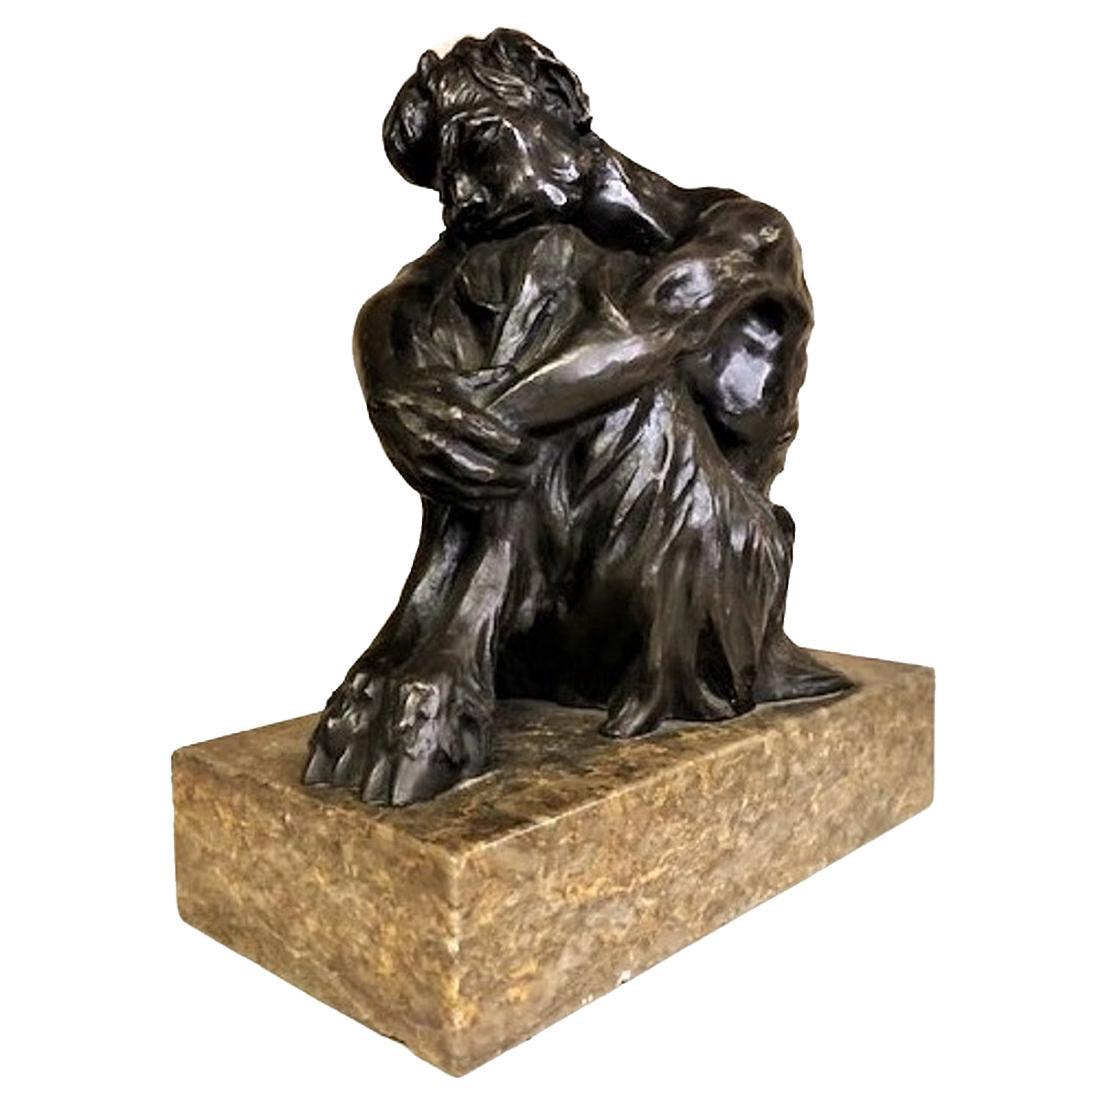 Young Satyr in Reverie, Jugenstil Patinated Bronze Sculpture, ca. 1900